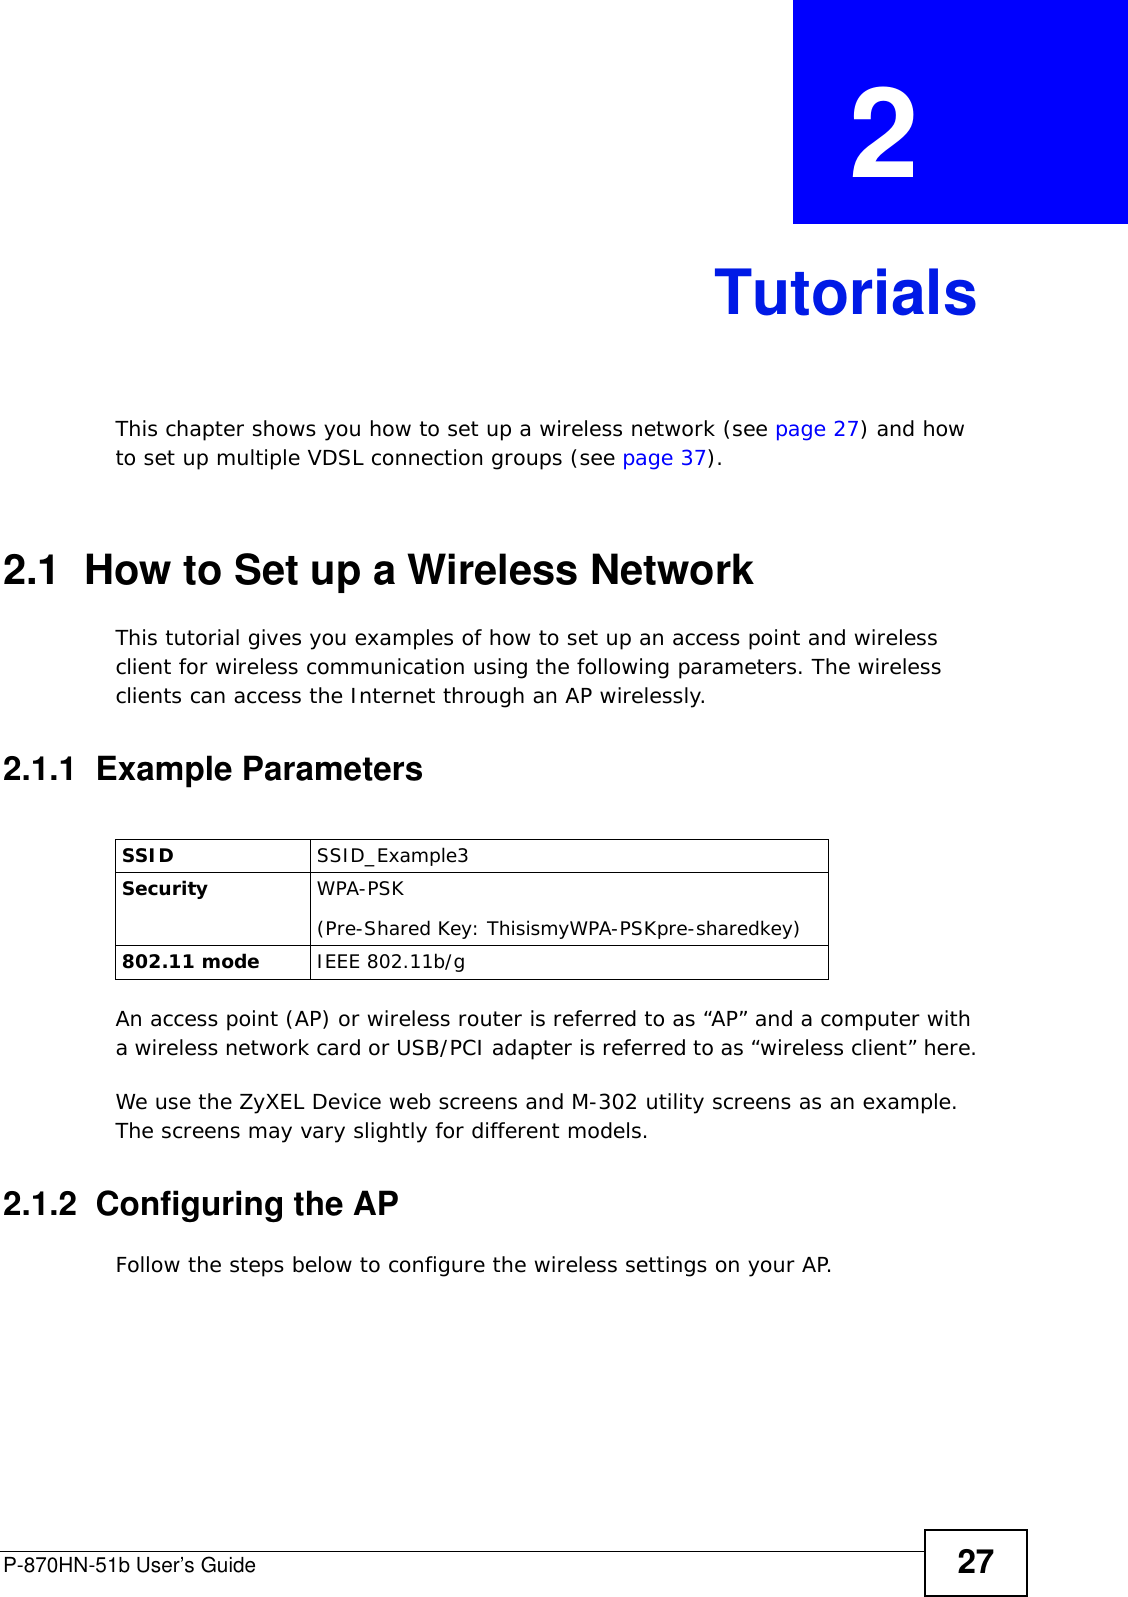 P-870HN-51b User’s Guide 27CHAPTER  2 TutorialsThis chapter shows you how to set up a wireless network (see page 27) and how to set up multiple VDSL connection groups (see page 37).2.1  How to Set up a Wireless NetworkThis tutorial gives you examples of how to set up an access point and wireless client for wireless communication using the following parameters. The wireless clients can access the Internet through an AP wirelessly.2.1.1  Example ParametersAn access point (AP) or wireless router is referred to as “AP” and a computer with a wireless network card or USB/PCI adapter is referred to as “wireless client” here.We use the ZyXEL Device web screens and M-302 utility screens as an example. The screens may vary slightly for different models.2.1.2  Configuring the APFollow the steps below to configure the wireless settings on your AP.SSID SSID_Example3Security  WPA-PSK(Pre-Shared Key: ThisismyWPA-PSKpre-sharedkey)802.11 mode IEEE 802.11b/g